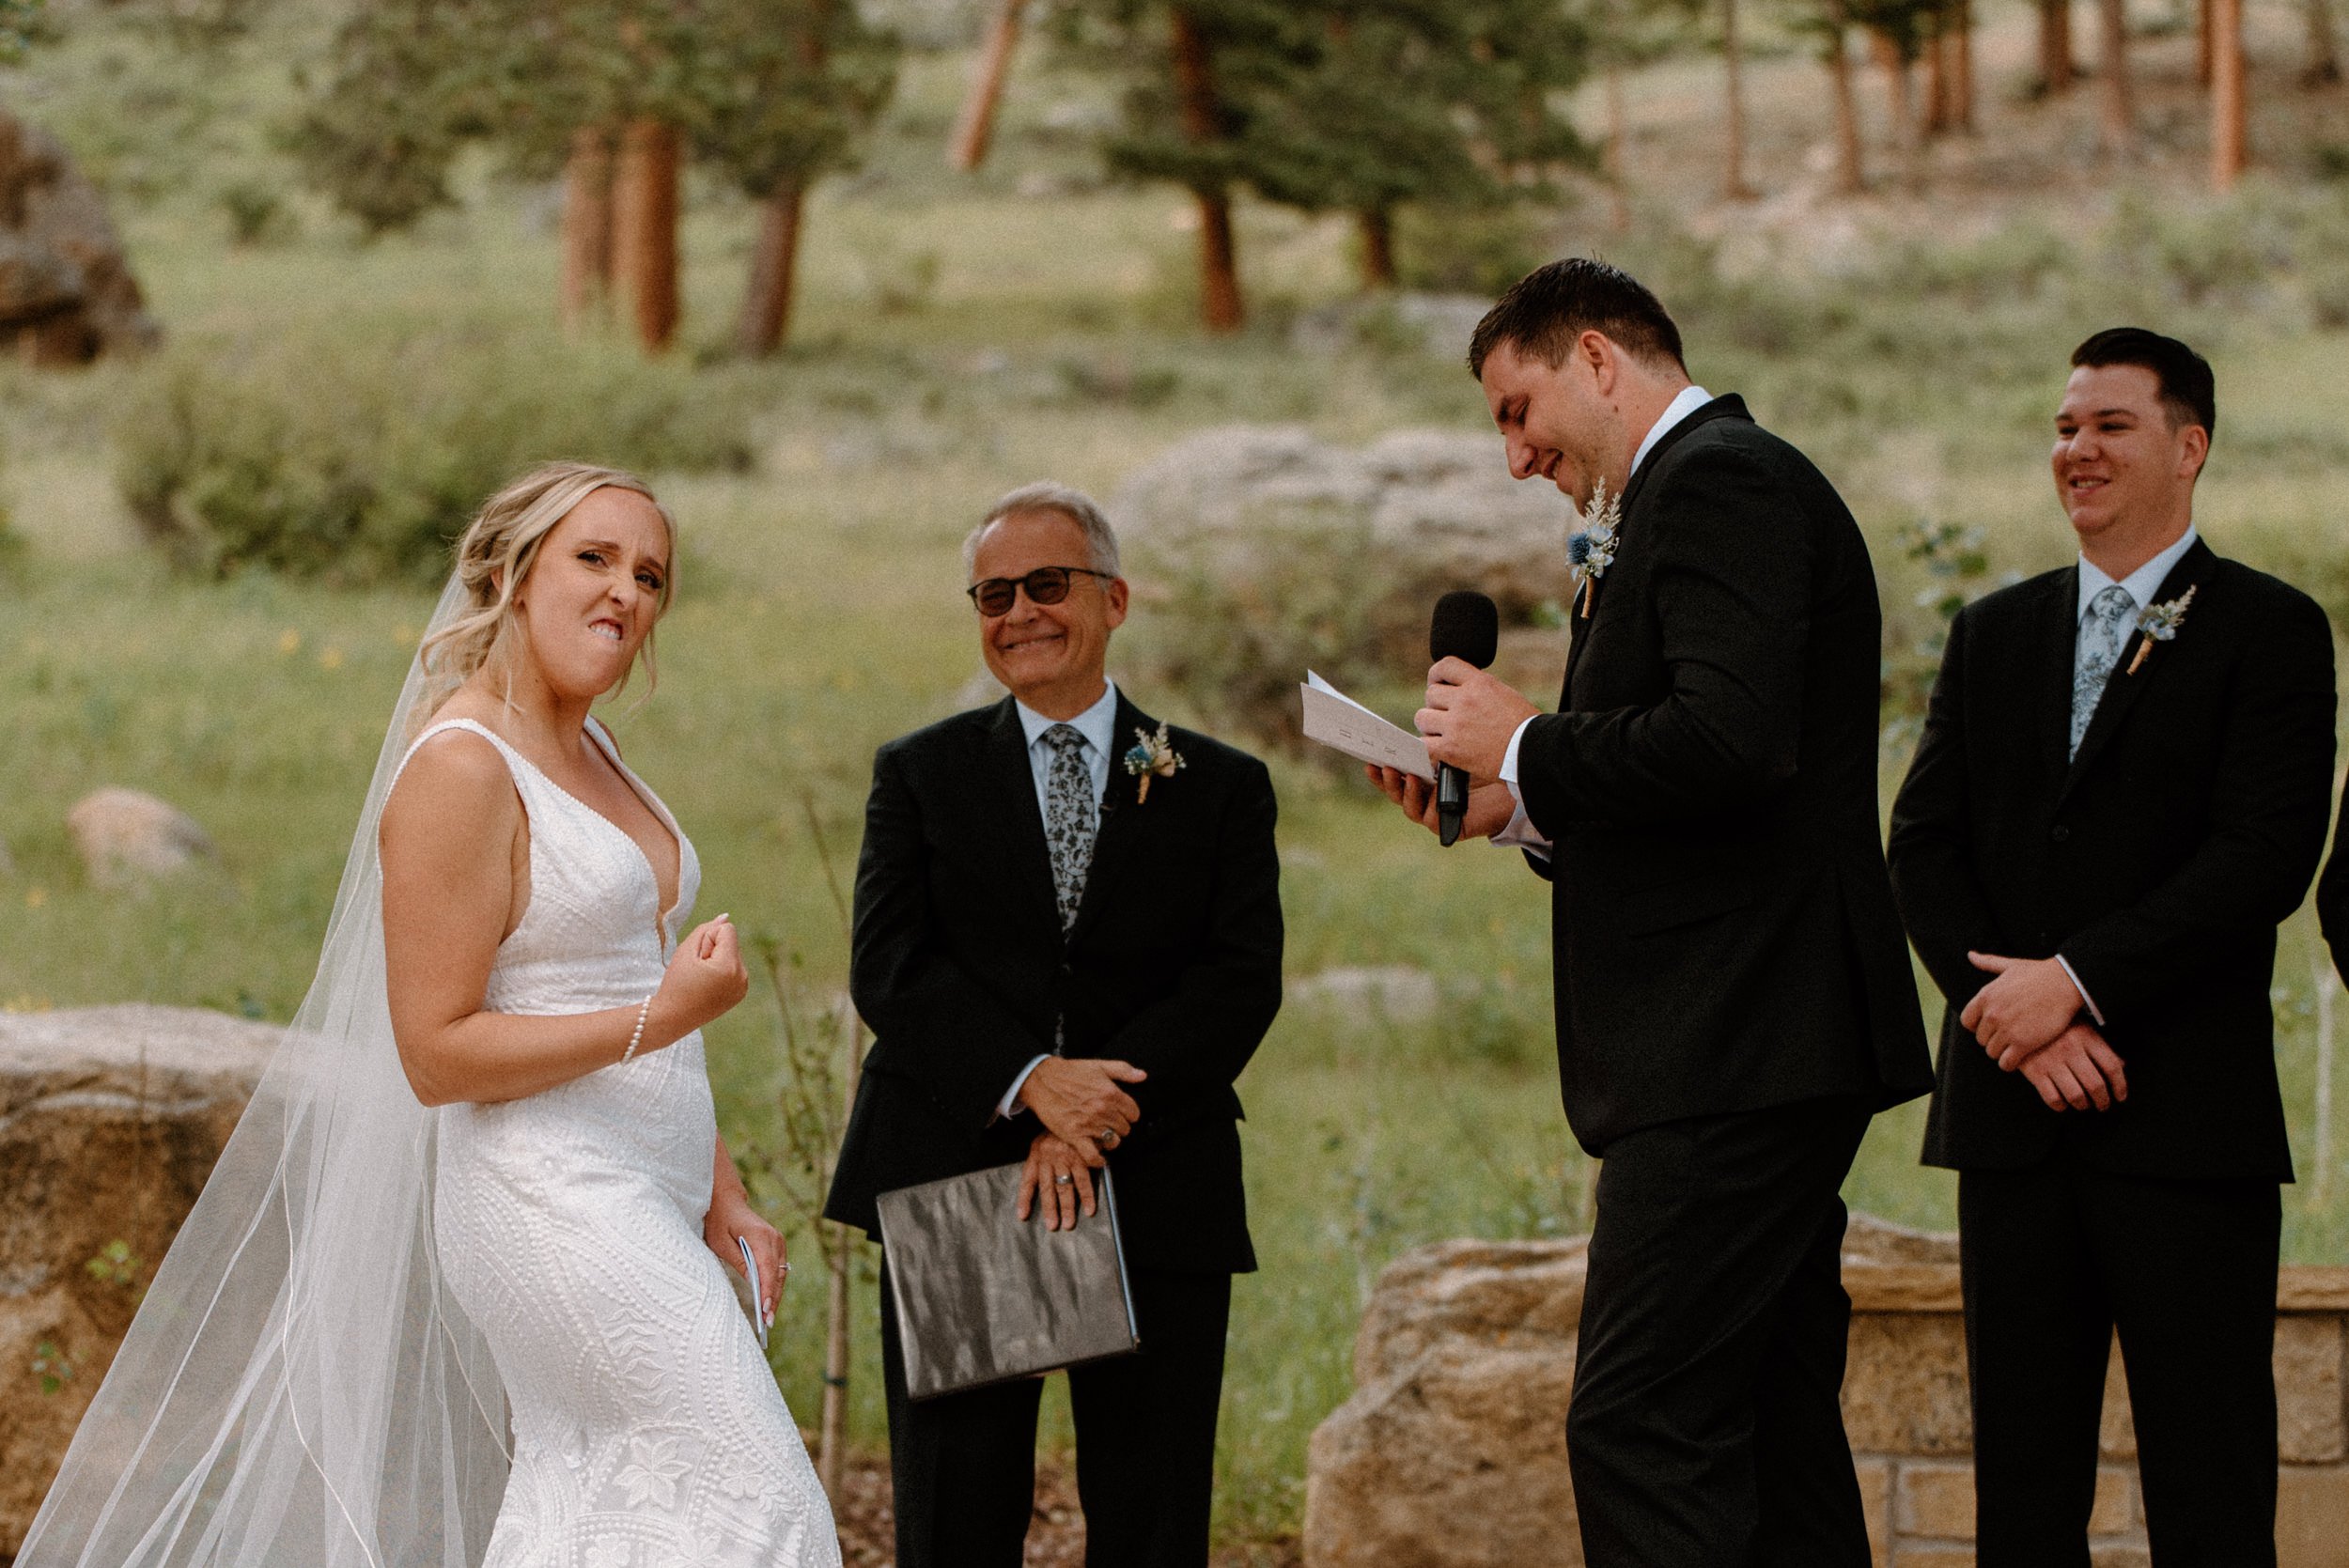 The bride makes a fist bump as the groom reads his vows to her